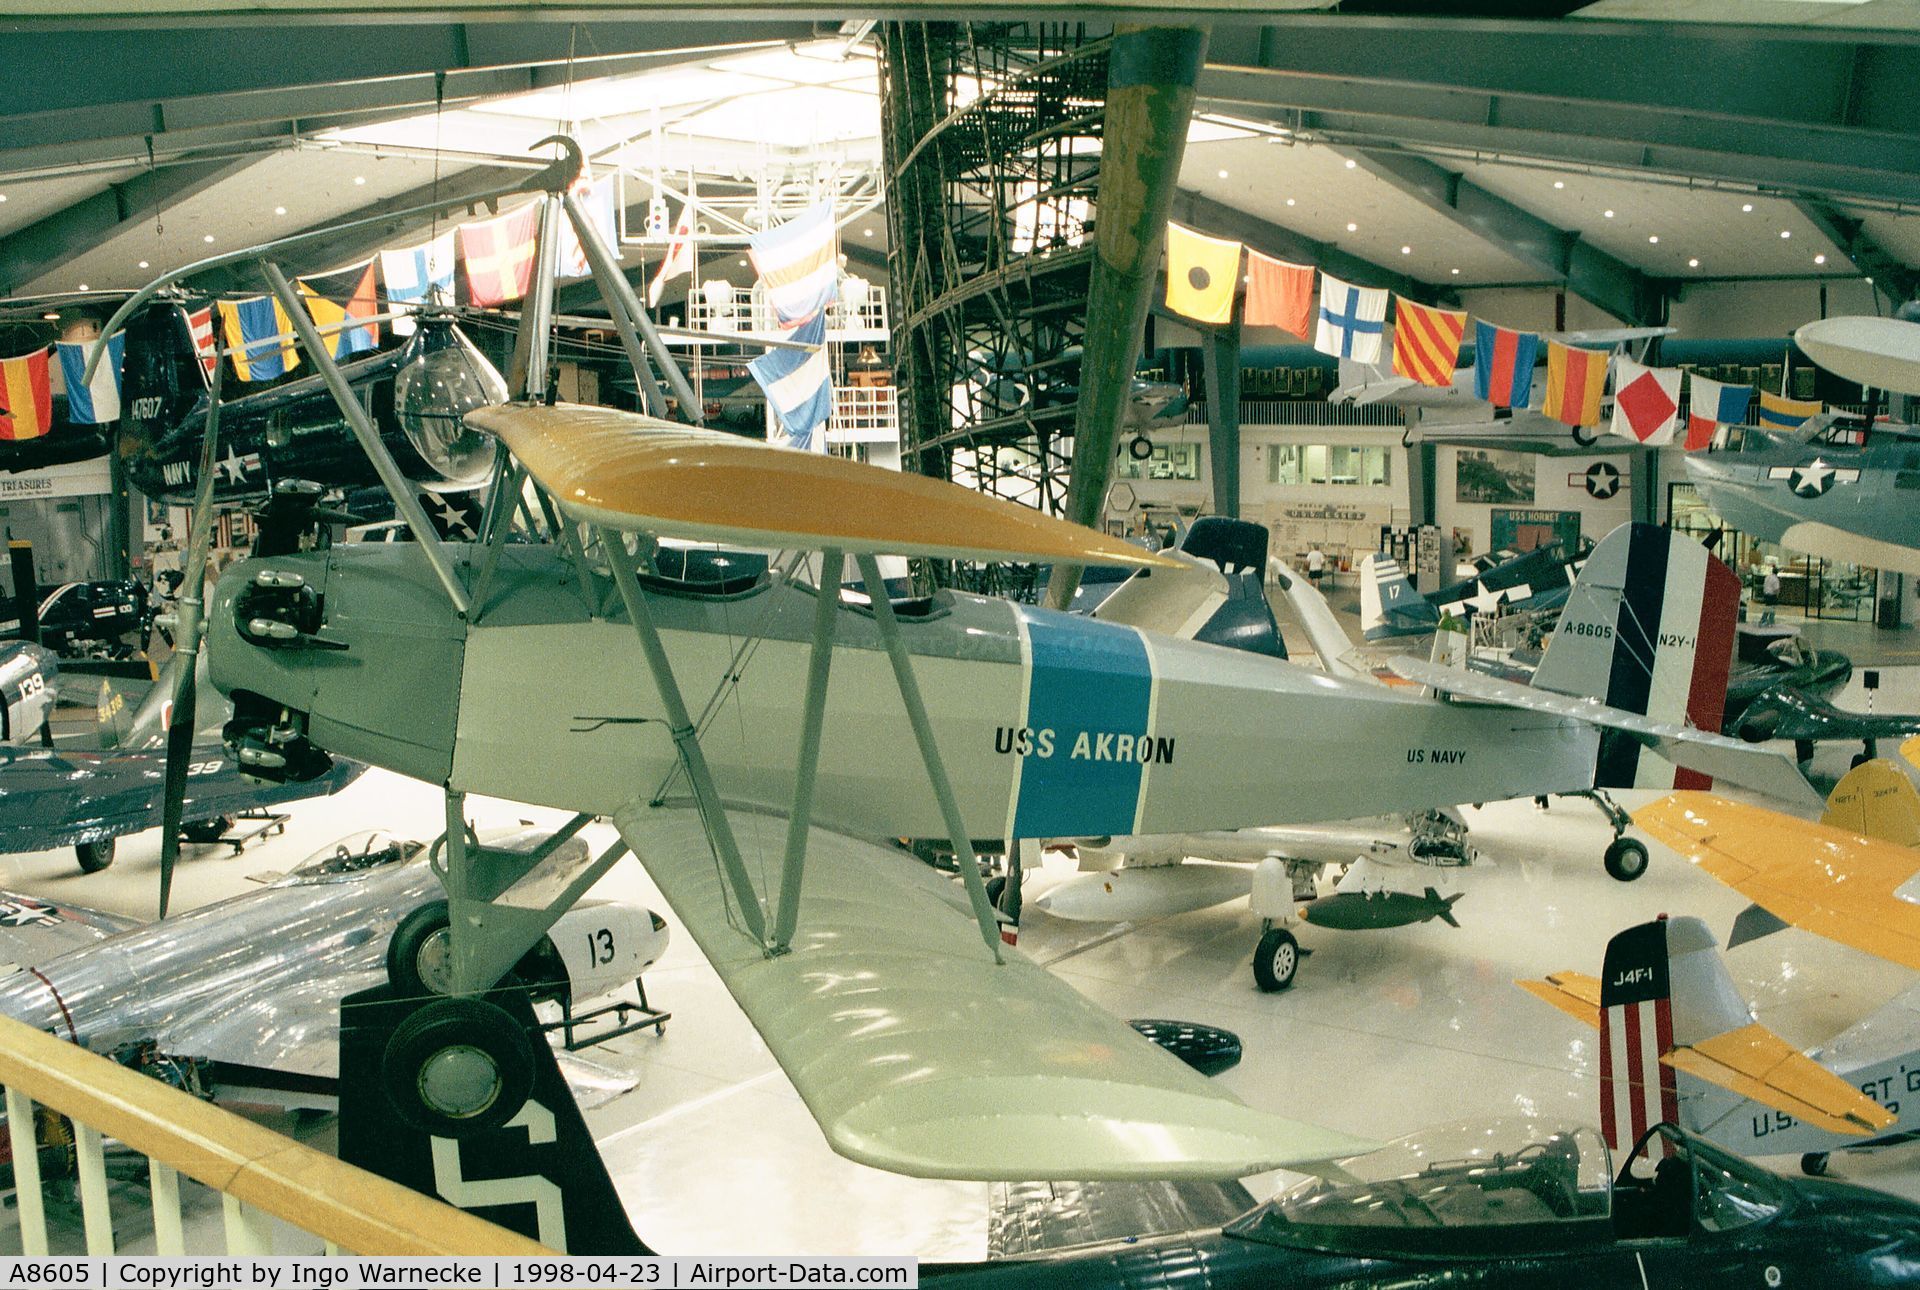 A8605, 1929 Consolidated N2Y-1 C/N Not found A8605, Consolidated N2Y-1 at the Museum of Naval Aviation, Pensacola FL